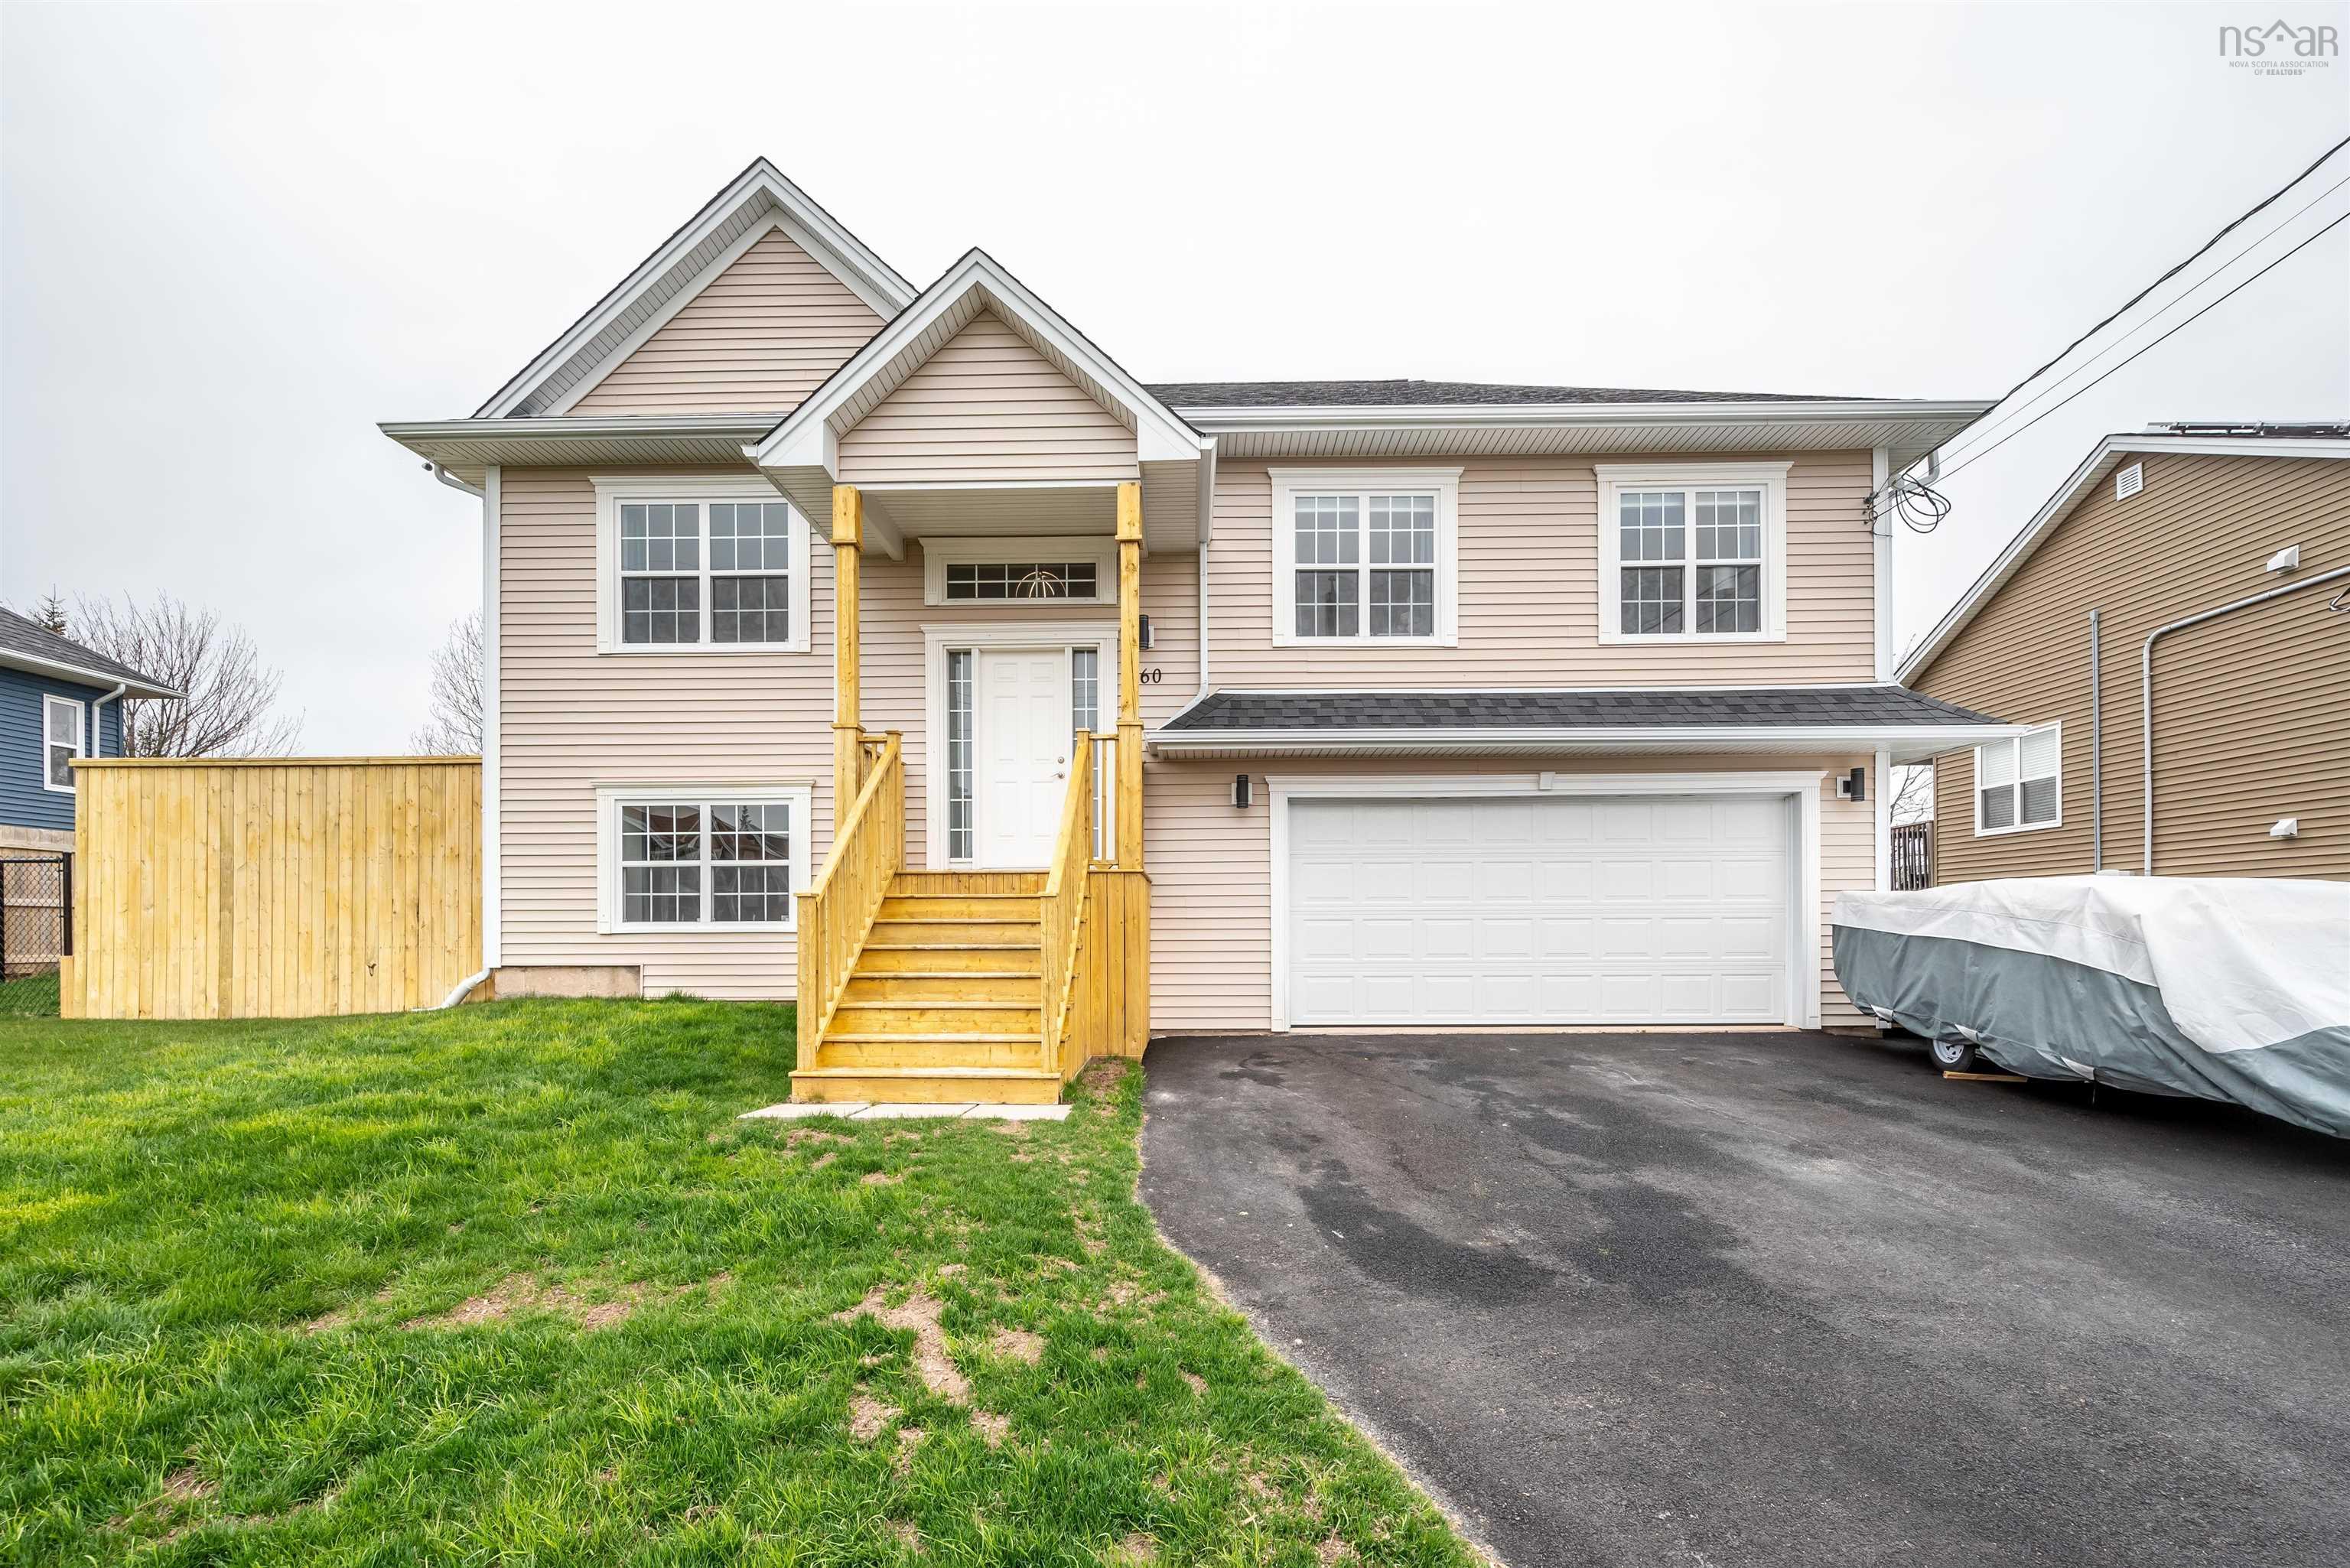 Located in a great neighbourhood of Brookview Estates in the seaside community of Eastern Passage just minutes to Dartmouth and Cole Harbour, you will discover 160 Keyport Ave, a fashionably updated home